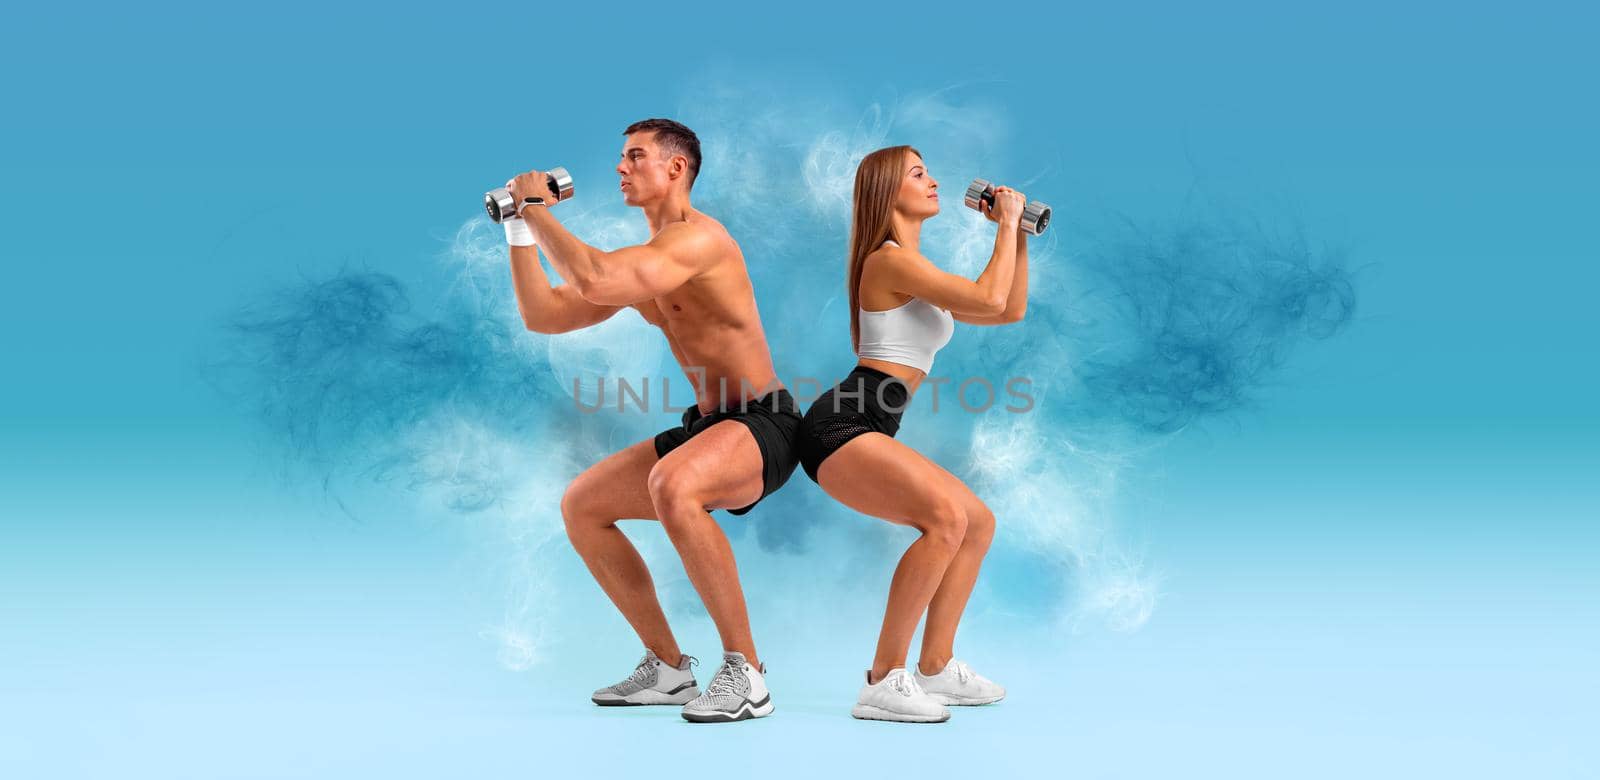 Fit couple at the gym on blue background. Fitness concept. Healthy life style